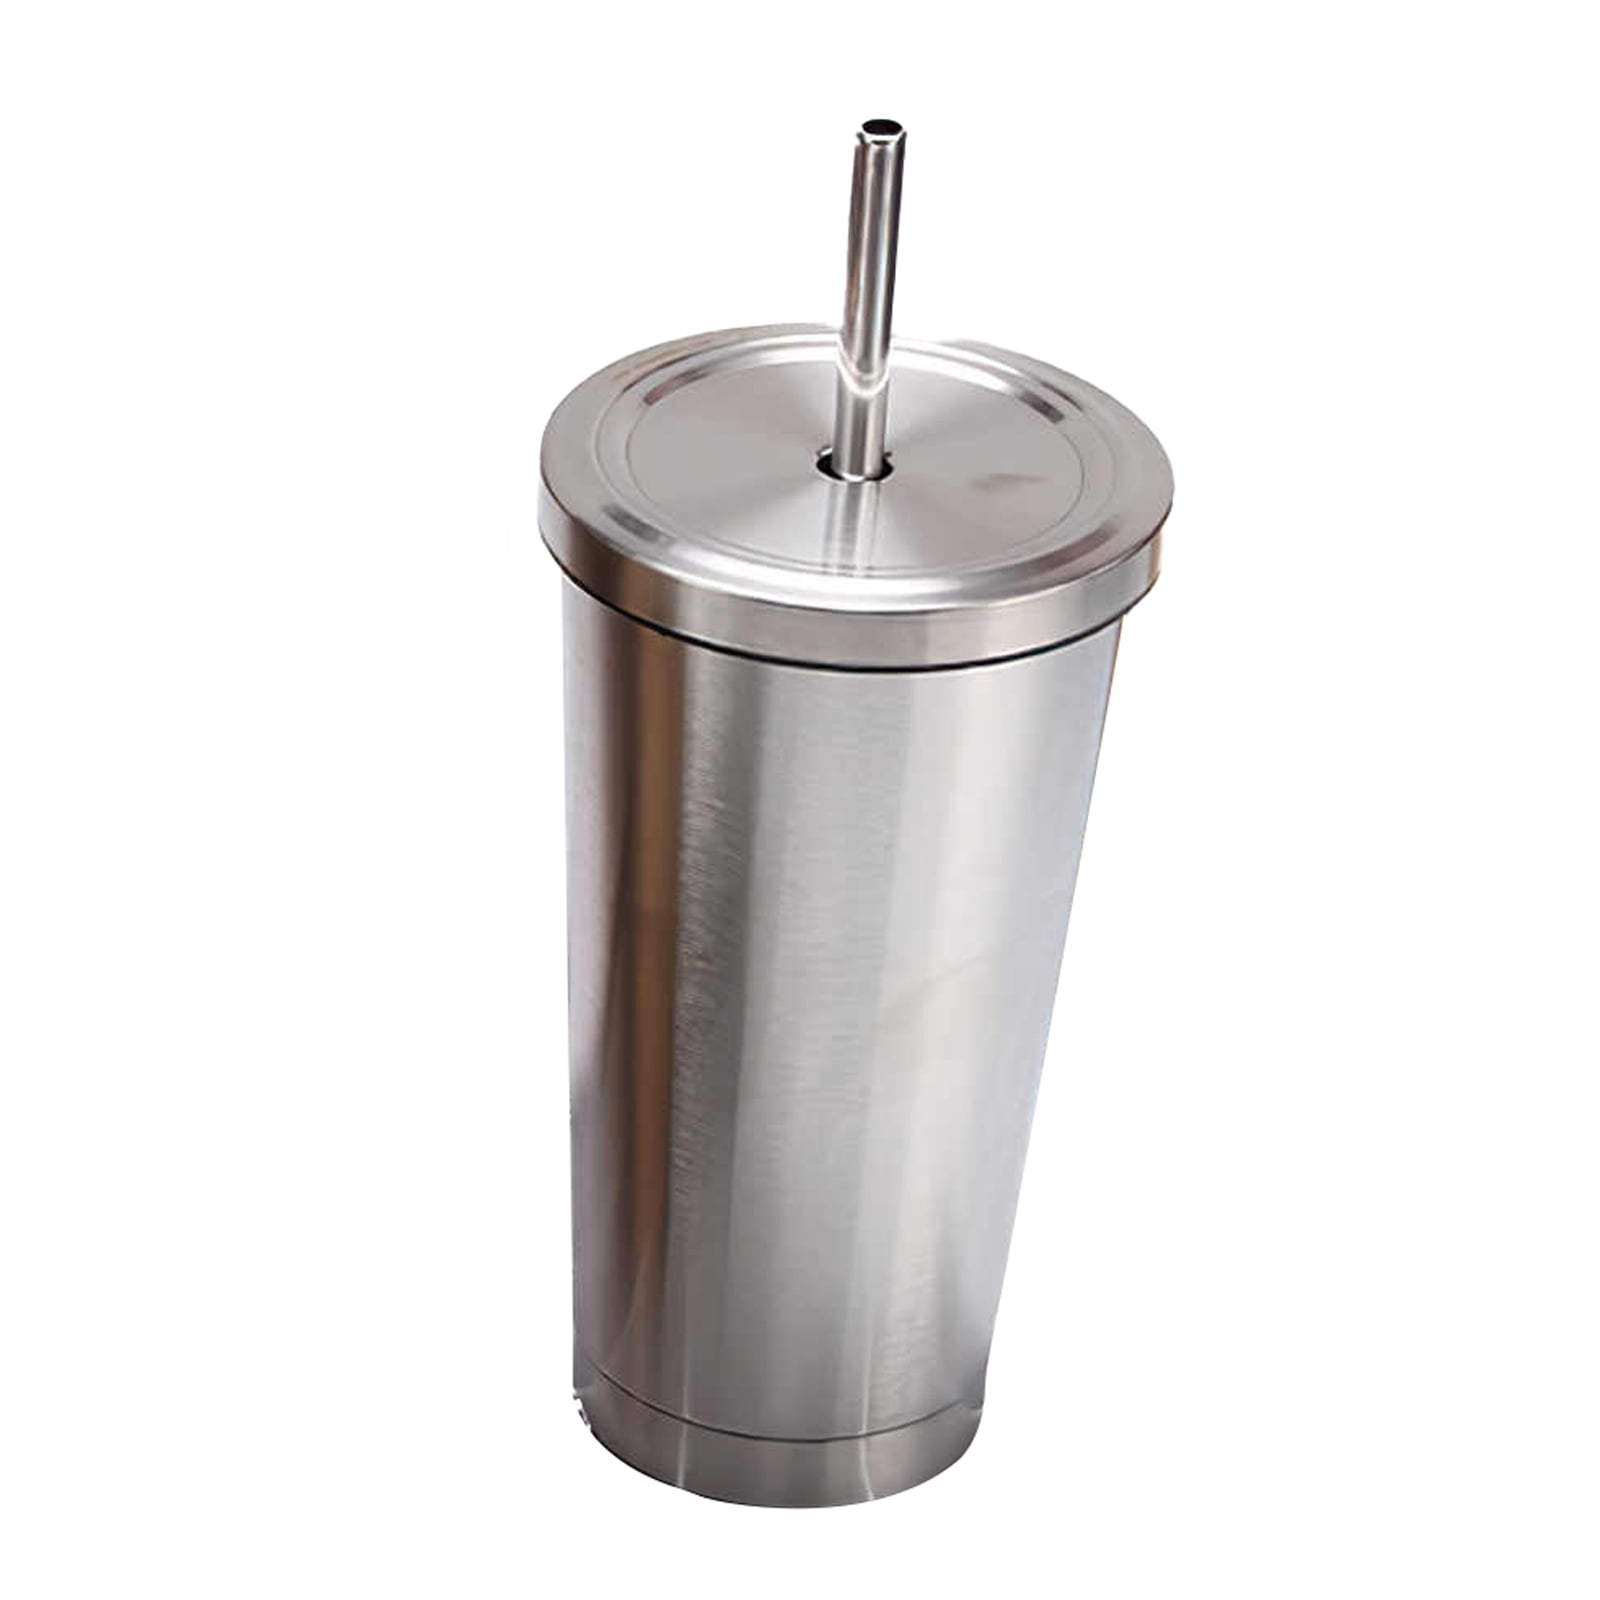 1pc/set 304 Stainless Steel Insulated Cup With Straw, Portable